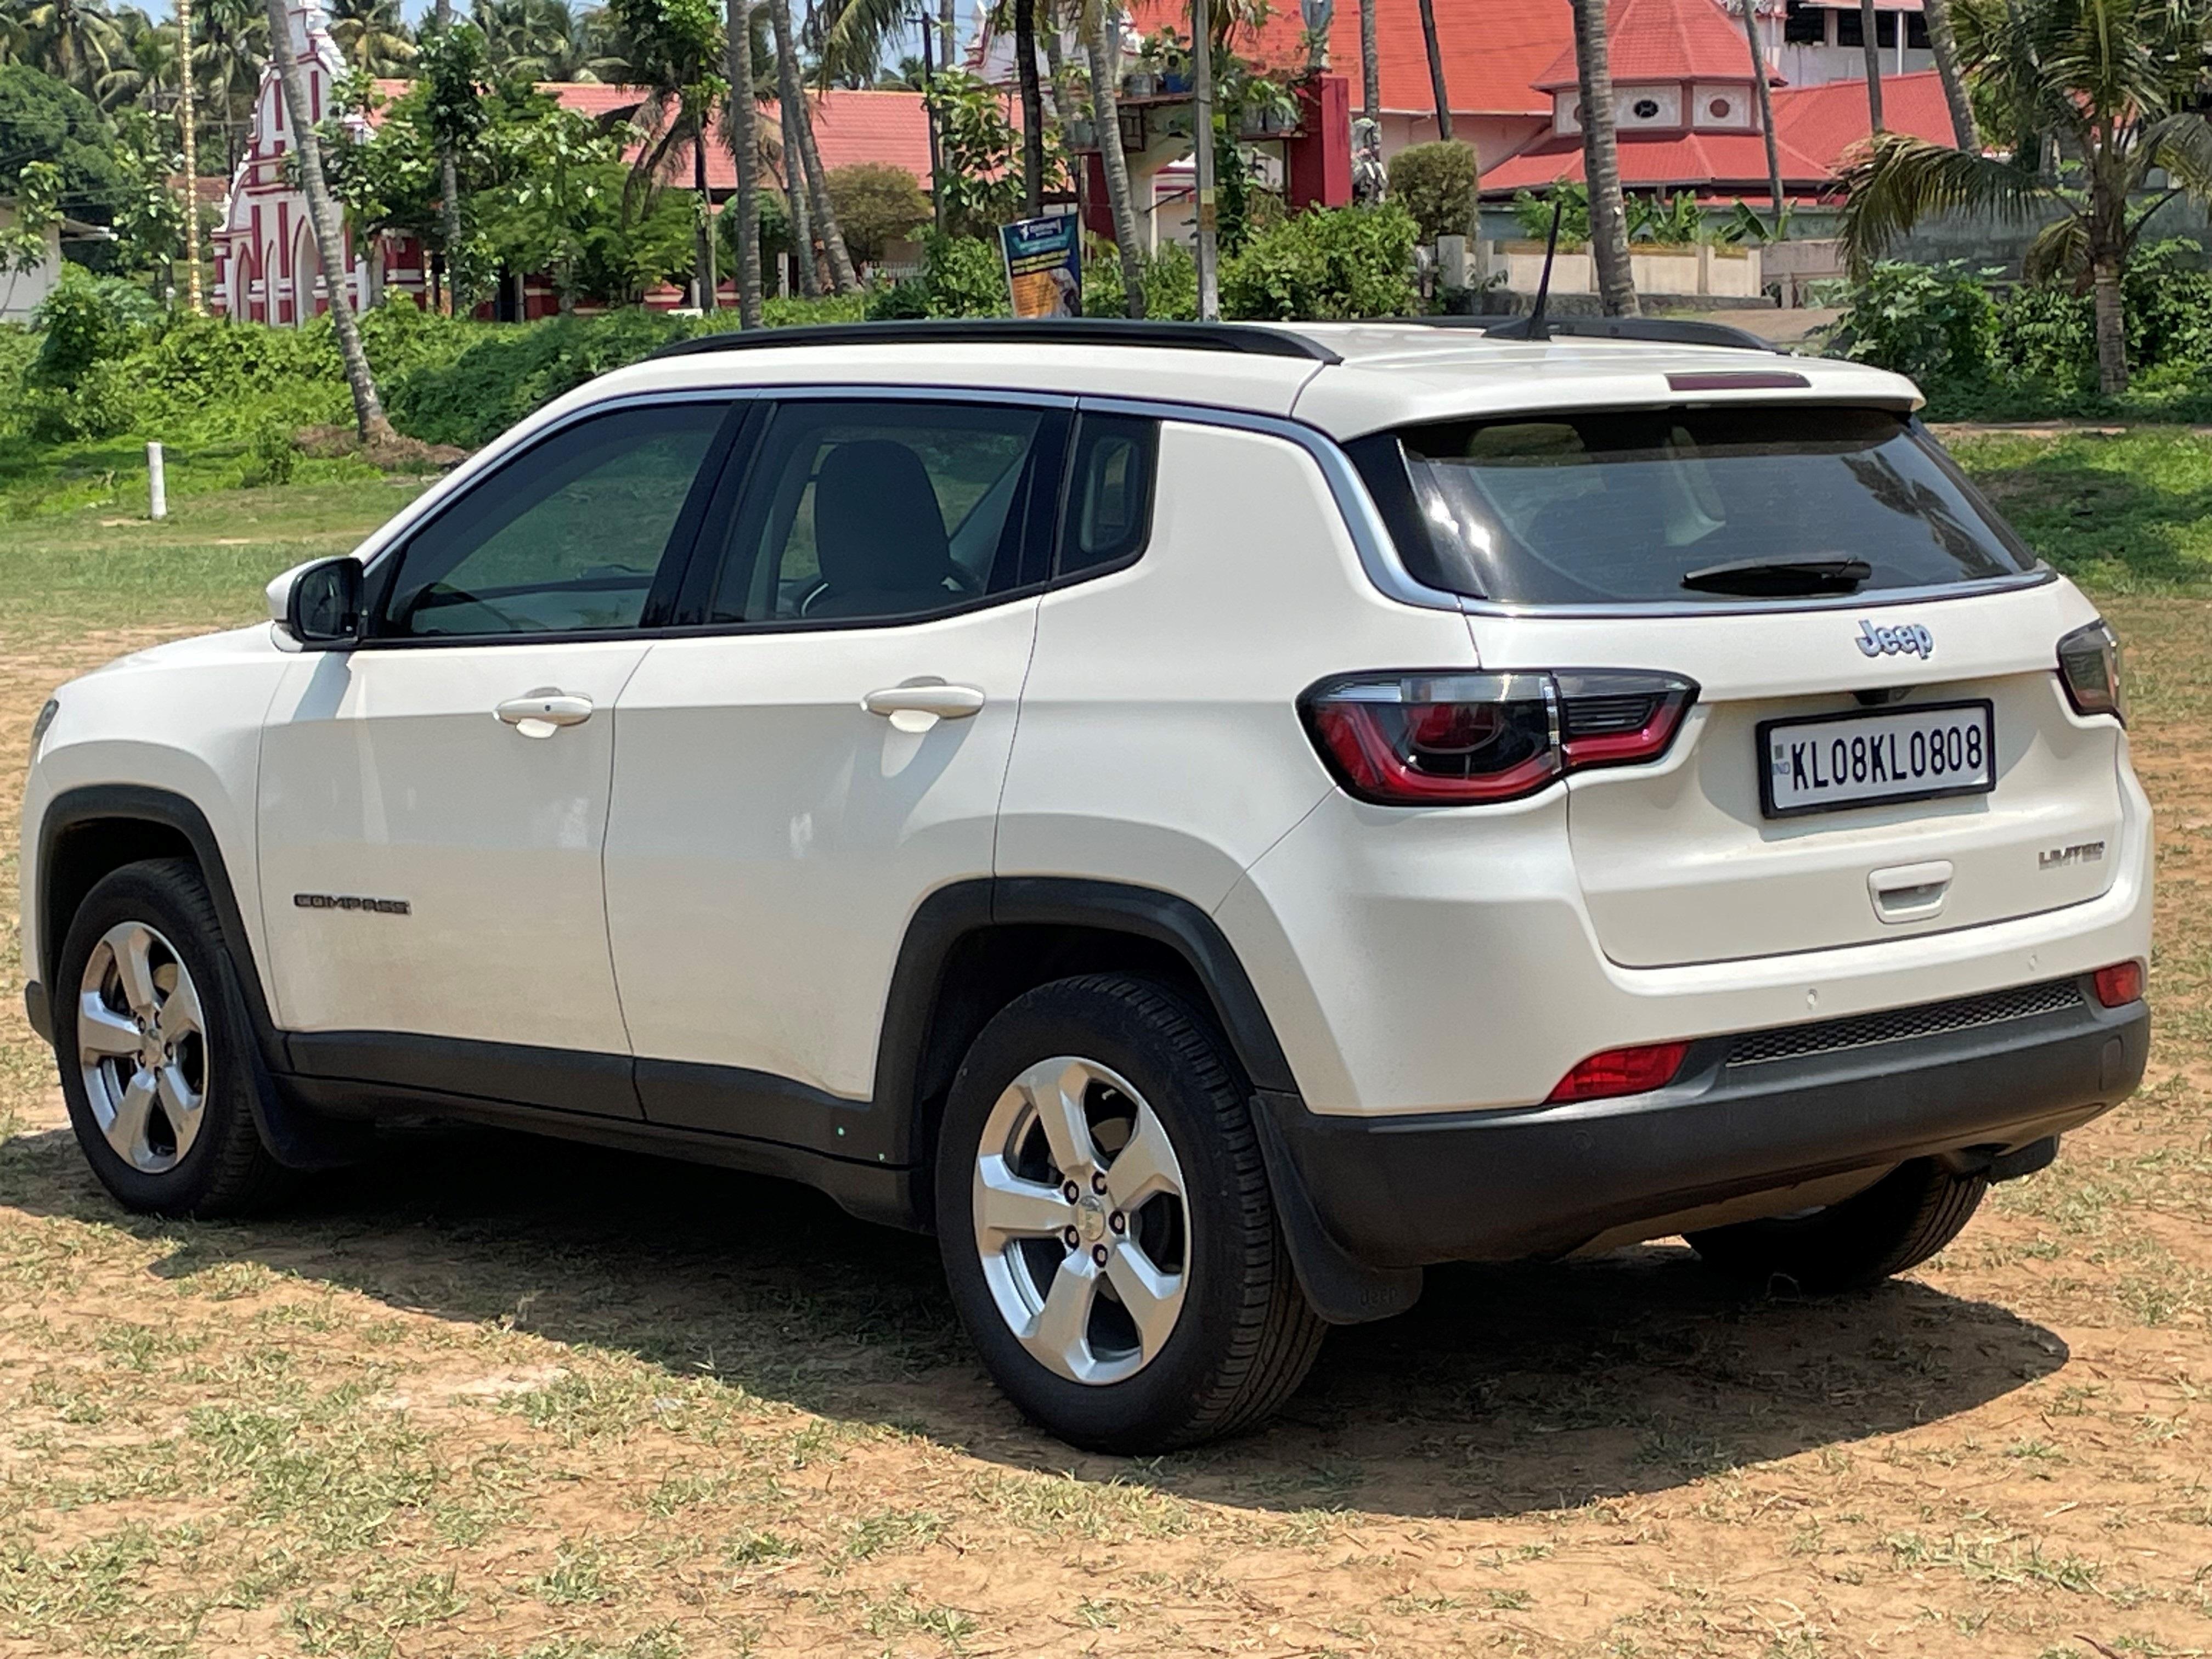 Engine Specifications for the 2018 Jeep Compass